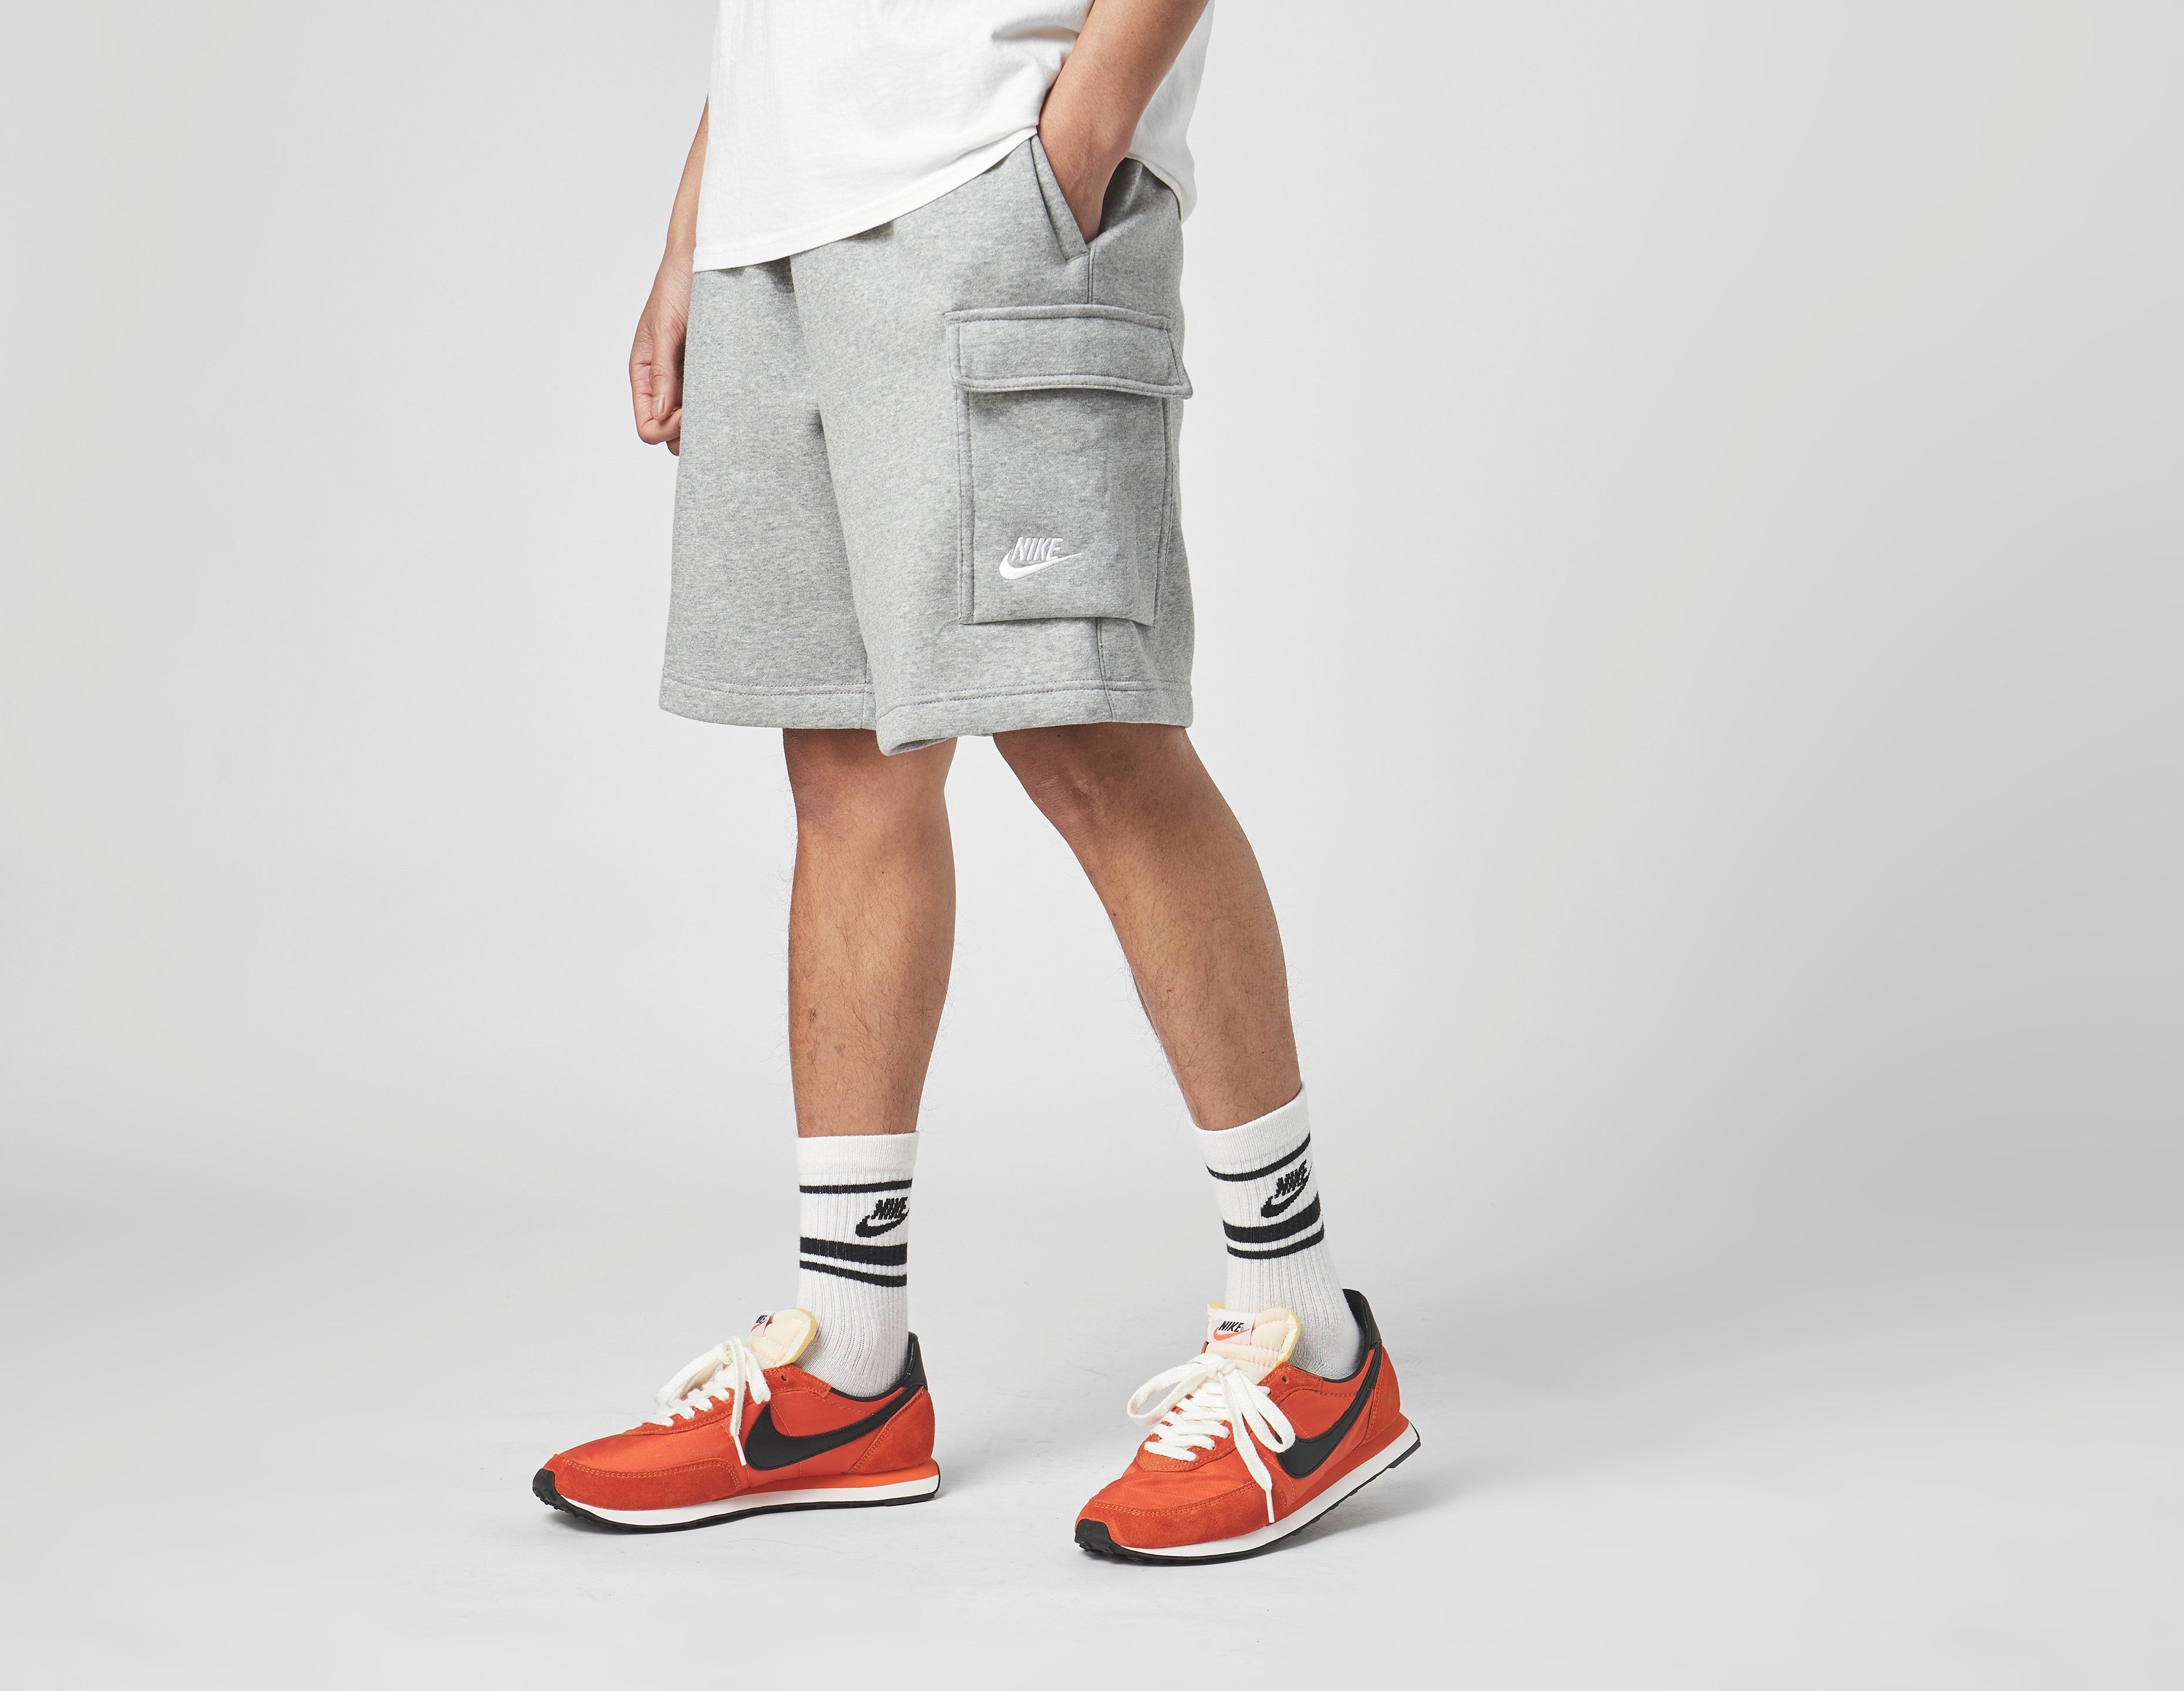 Infrastructure-intelligence? | nike racer dunk patent black boots shoes for sale | Grey Nike Foundation Fleece Cargo Shorts